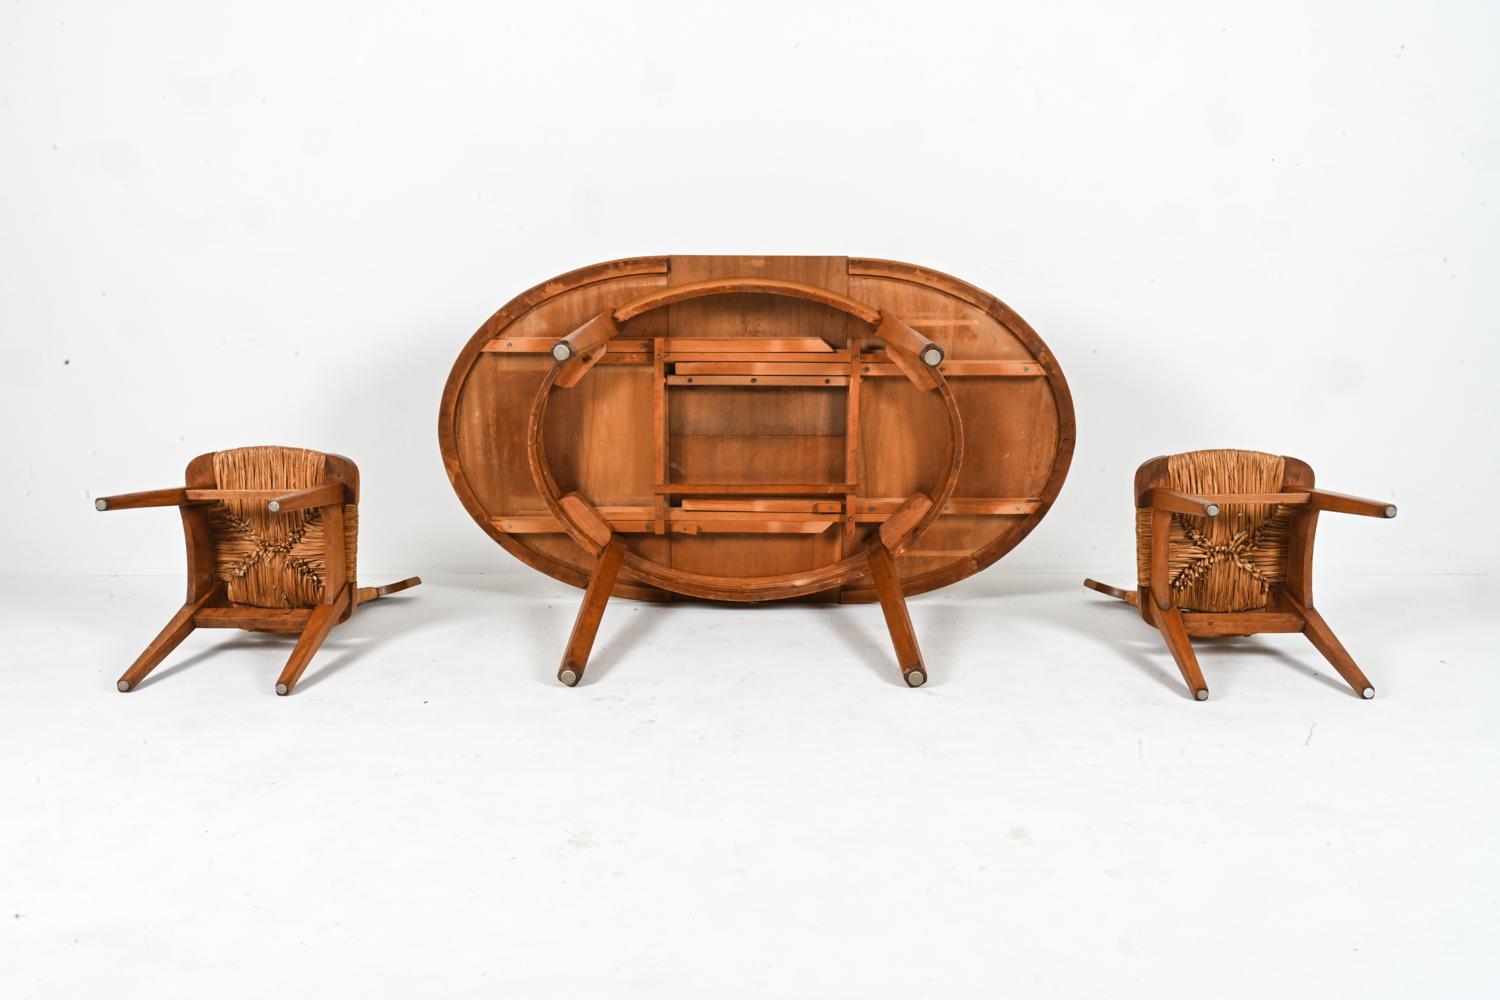 W. Kuyper Dutch Arts & Crafts Dining Suite in Oak & Rush, c. 1920s For Sale 15